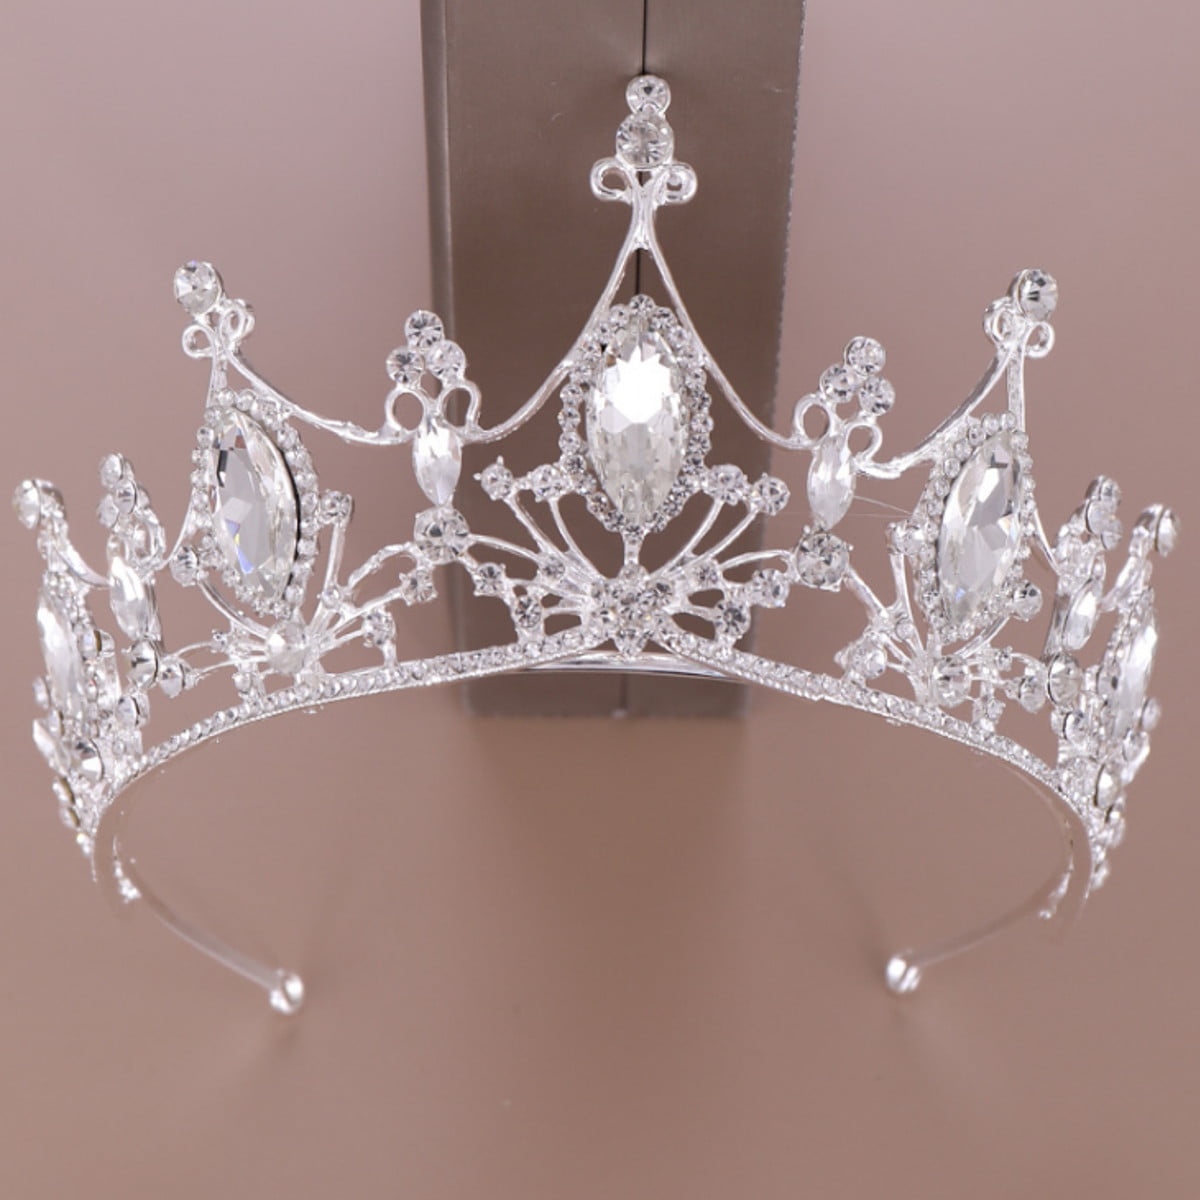 3'' Adult Blue Silver Crystal Wedding Bridal Party Pageant Prom Tiara Crown 